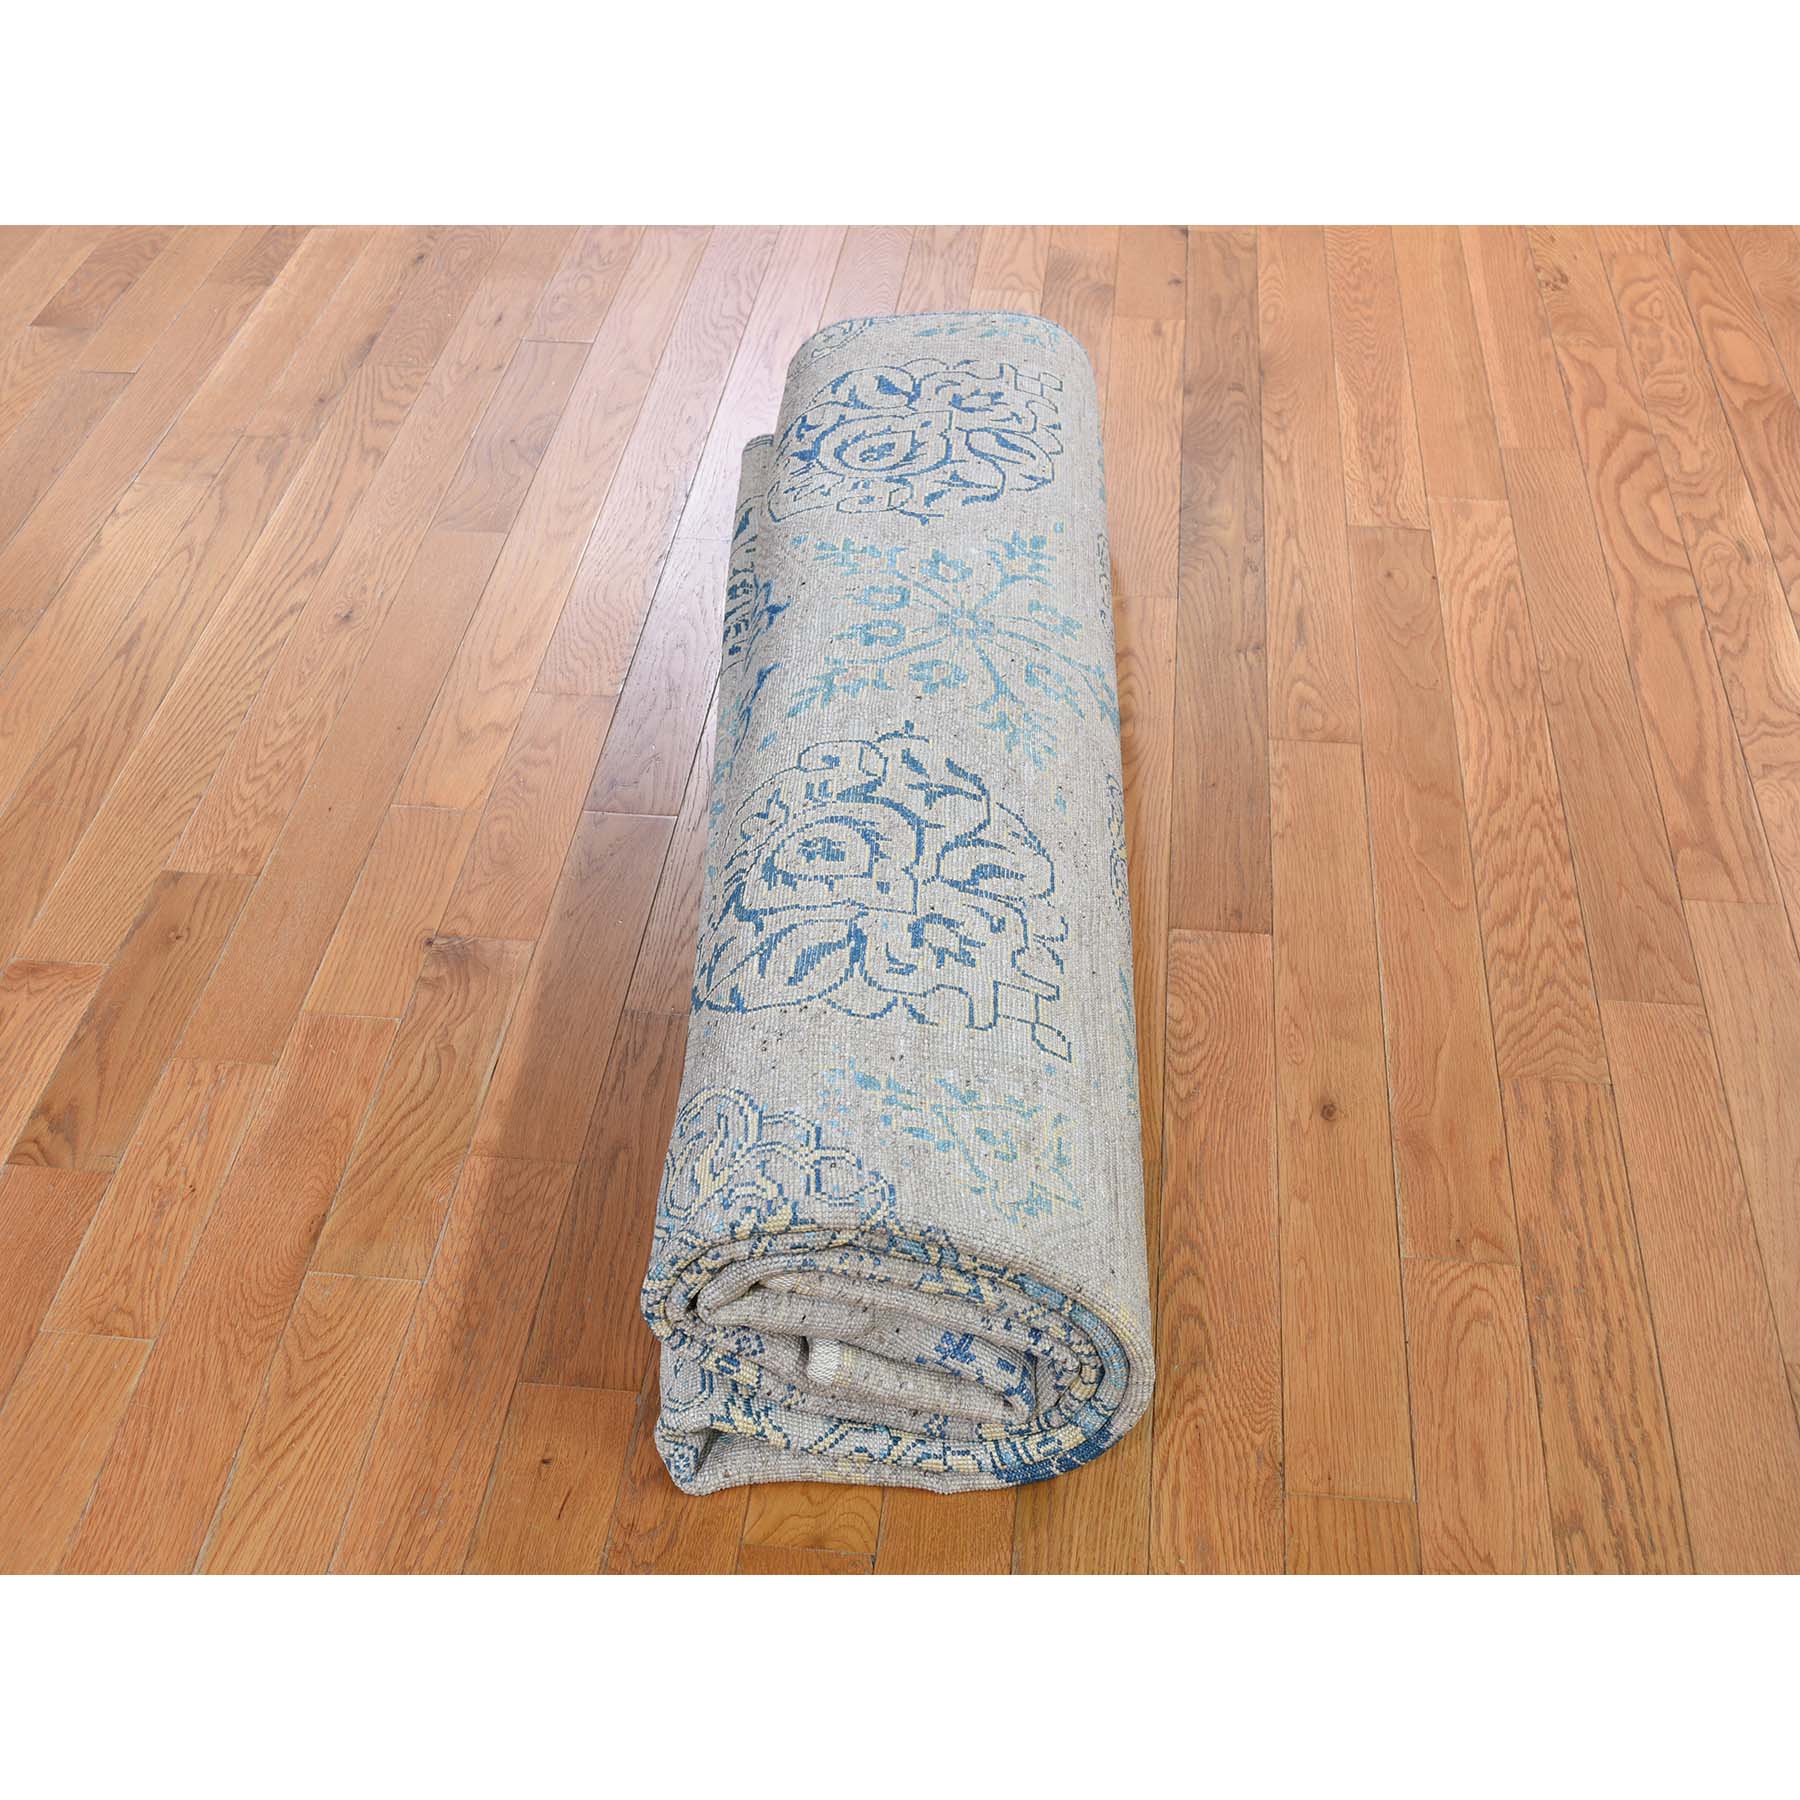 8-1 x9-9  Wool And Silk Textured Hi-Low Pile Ottoman Influence Hand-Knotted Modern Oriental Rug 